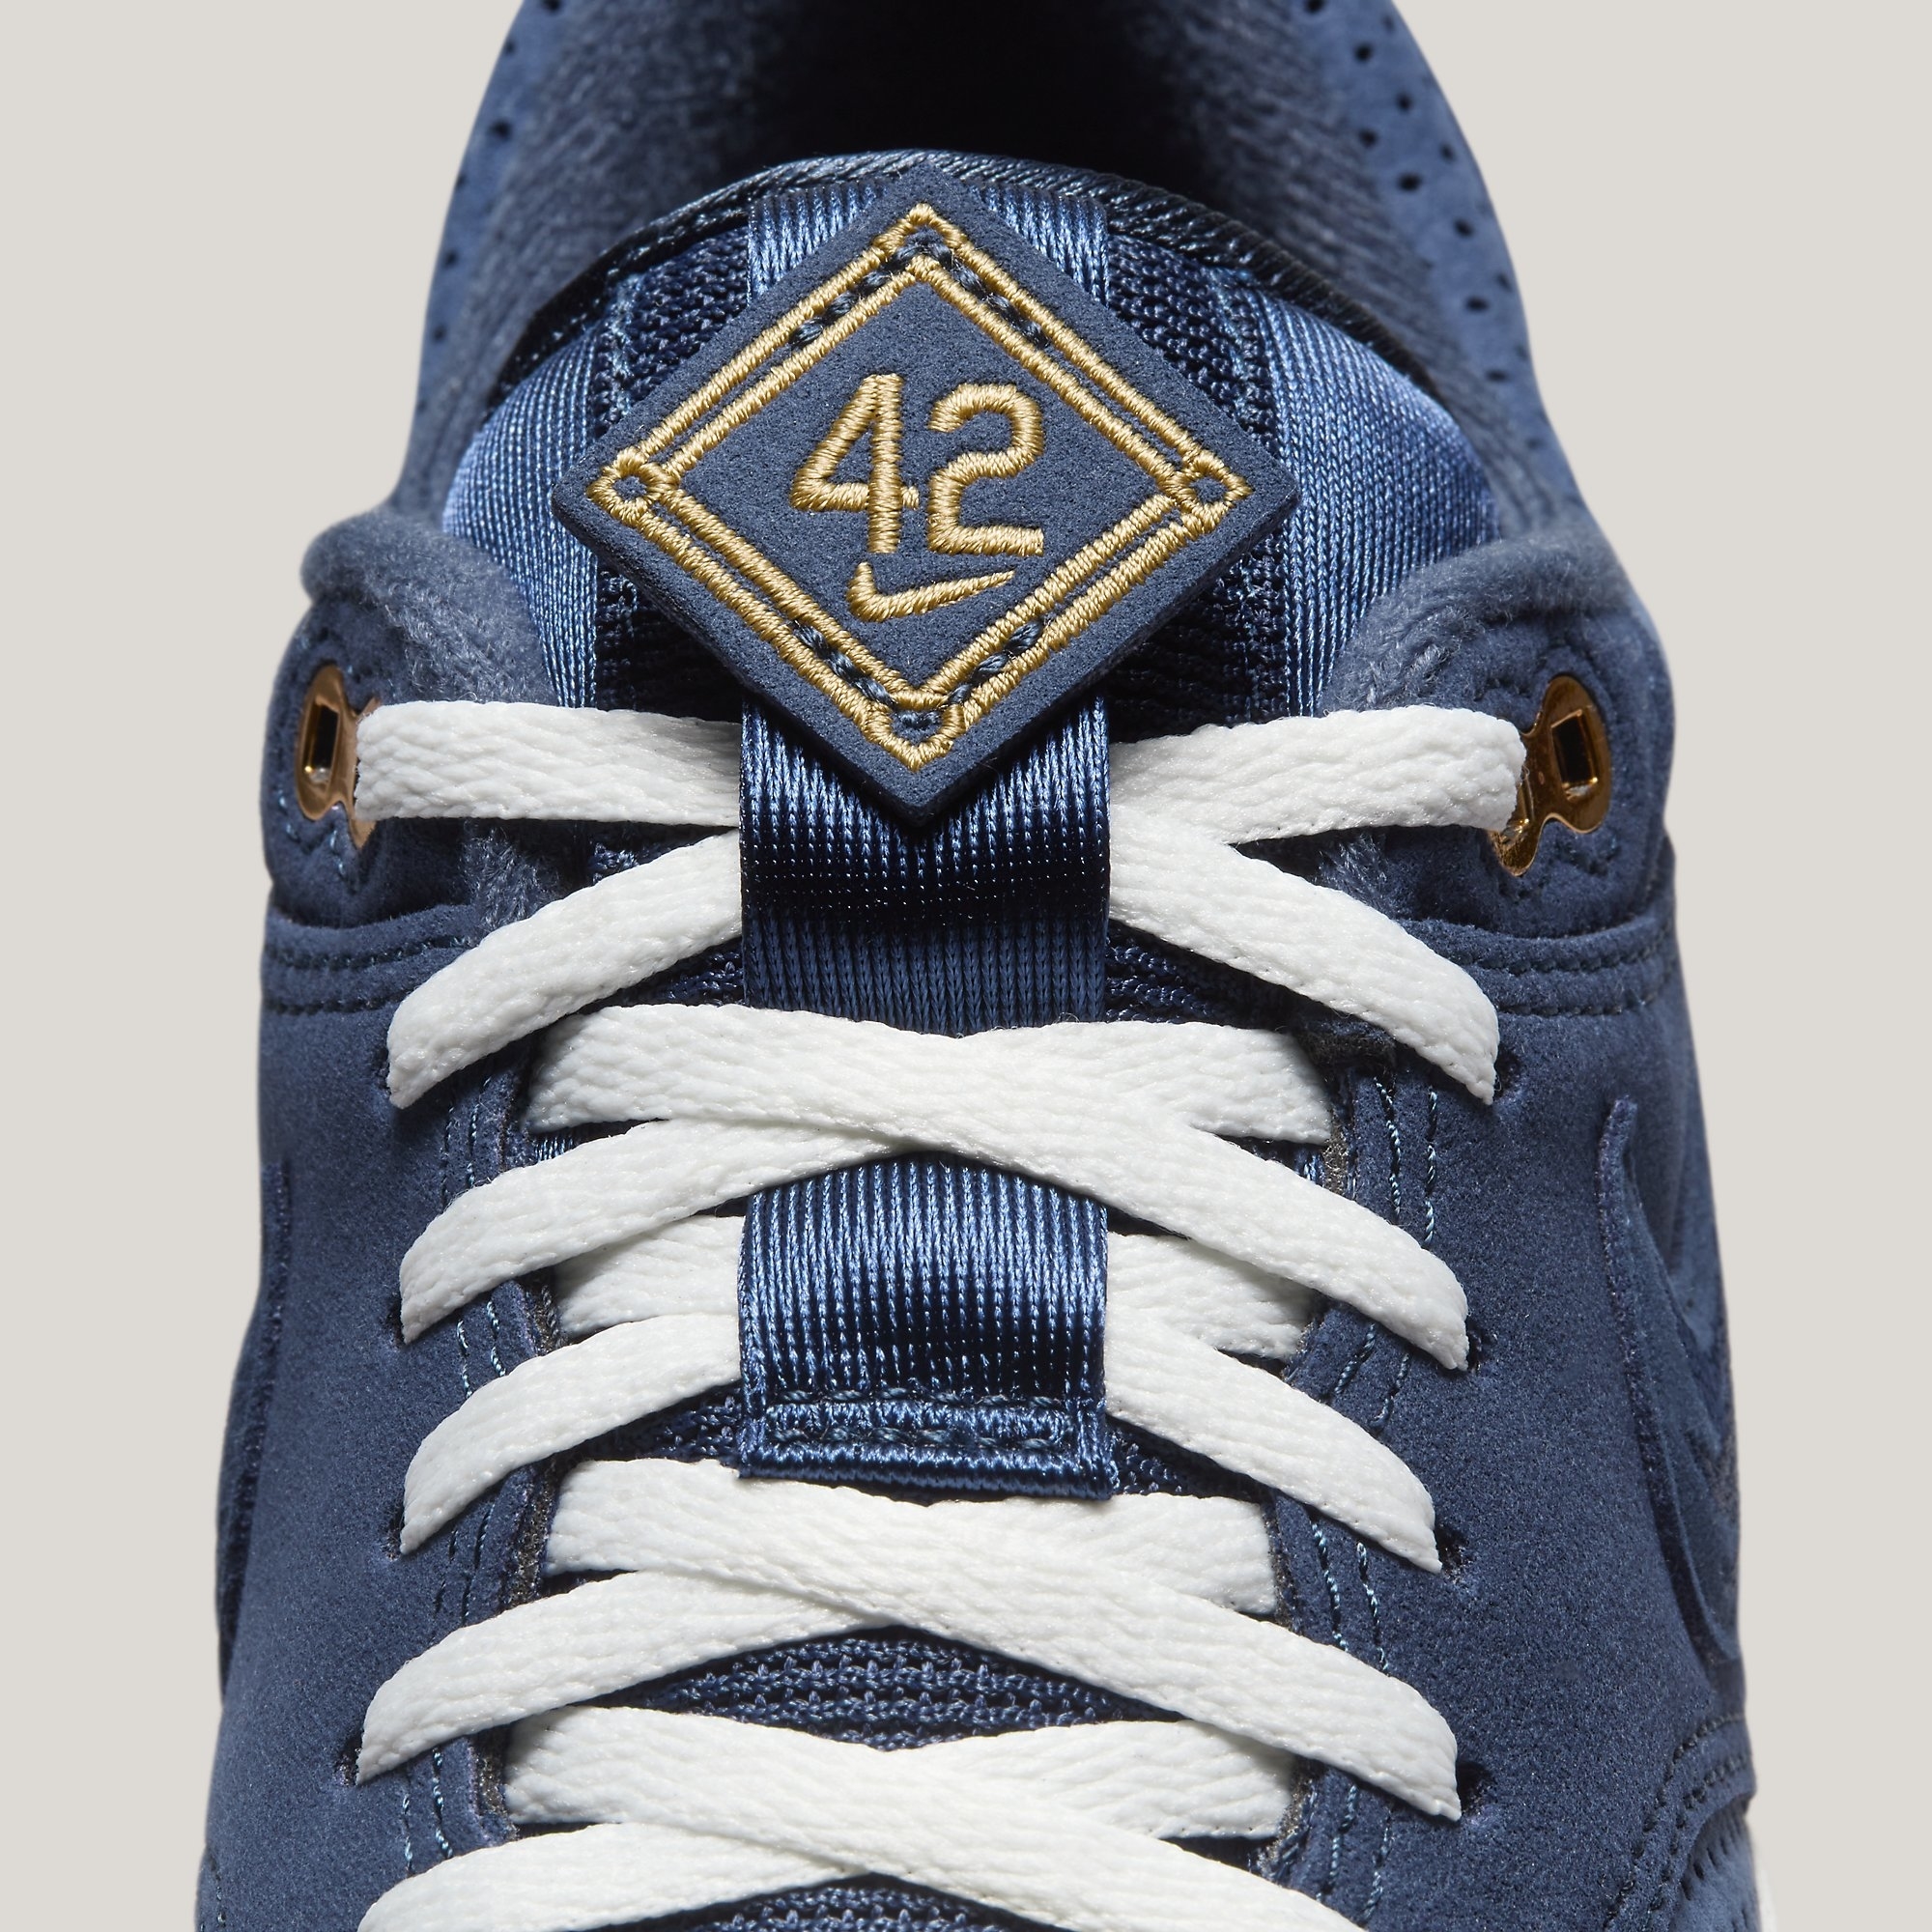 The Nike Air Max 1 '86 OG Jackie Robinson Releases April 2024